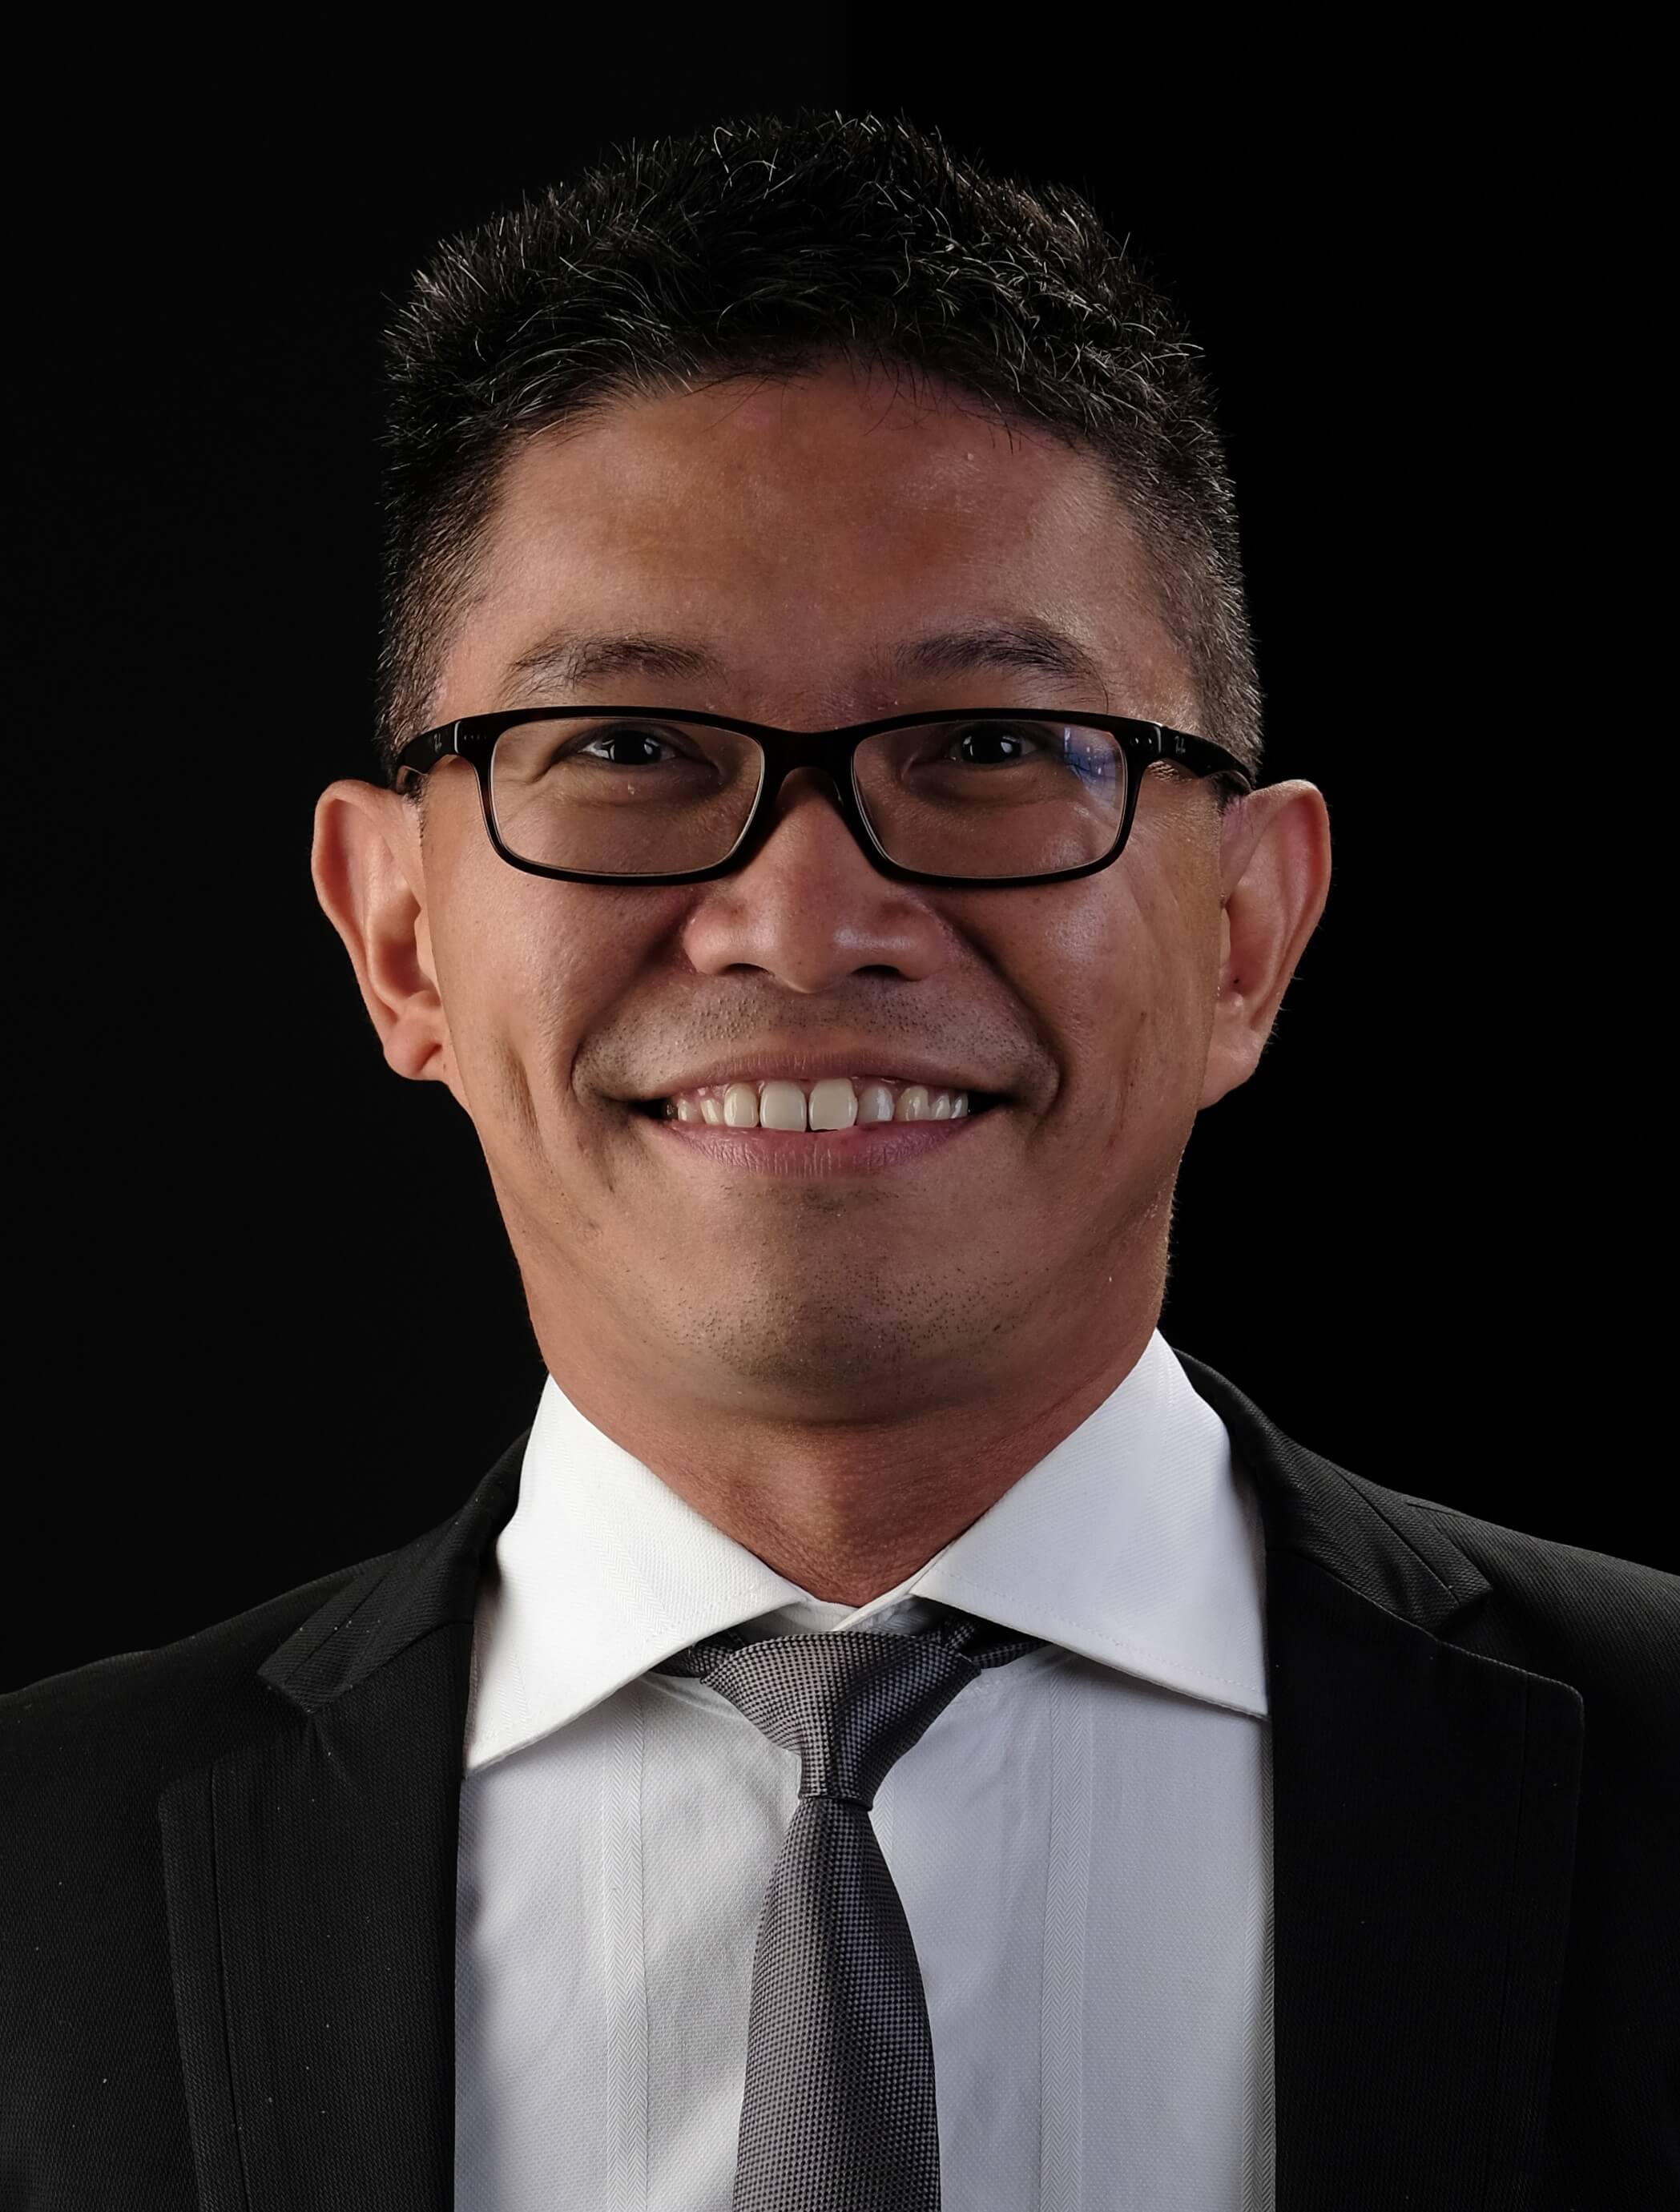  Jeremey Sea, Senior Manager of Commercial Marketing for APAC, Sensormatic Solutions